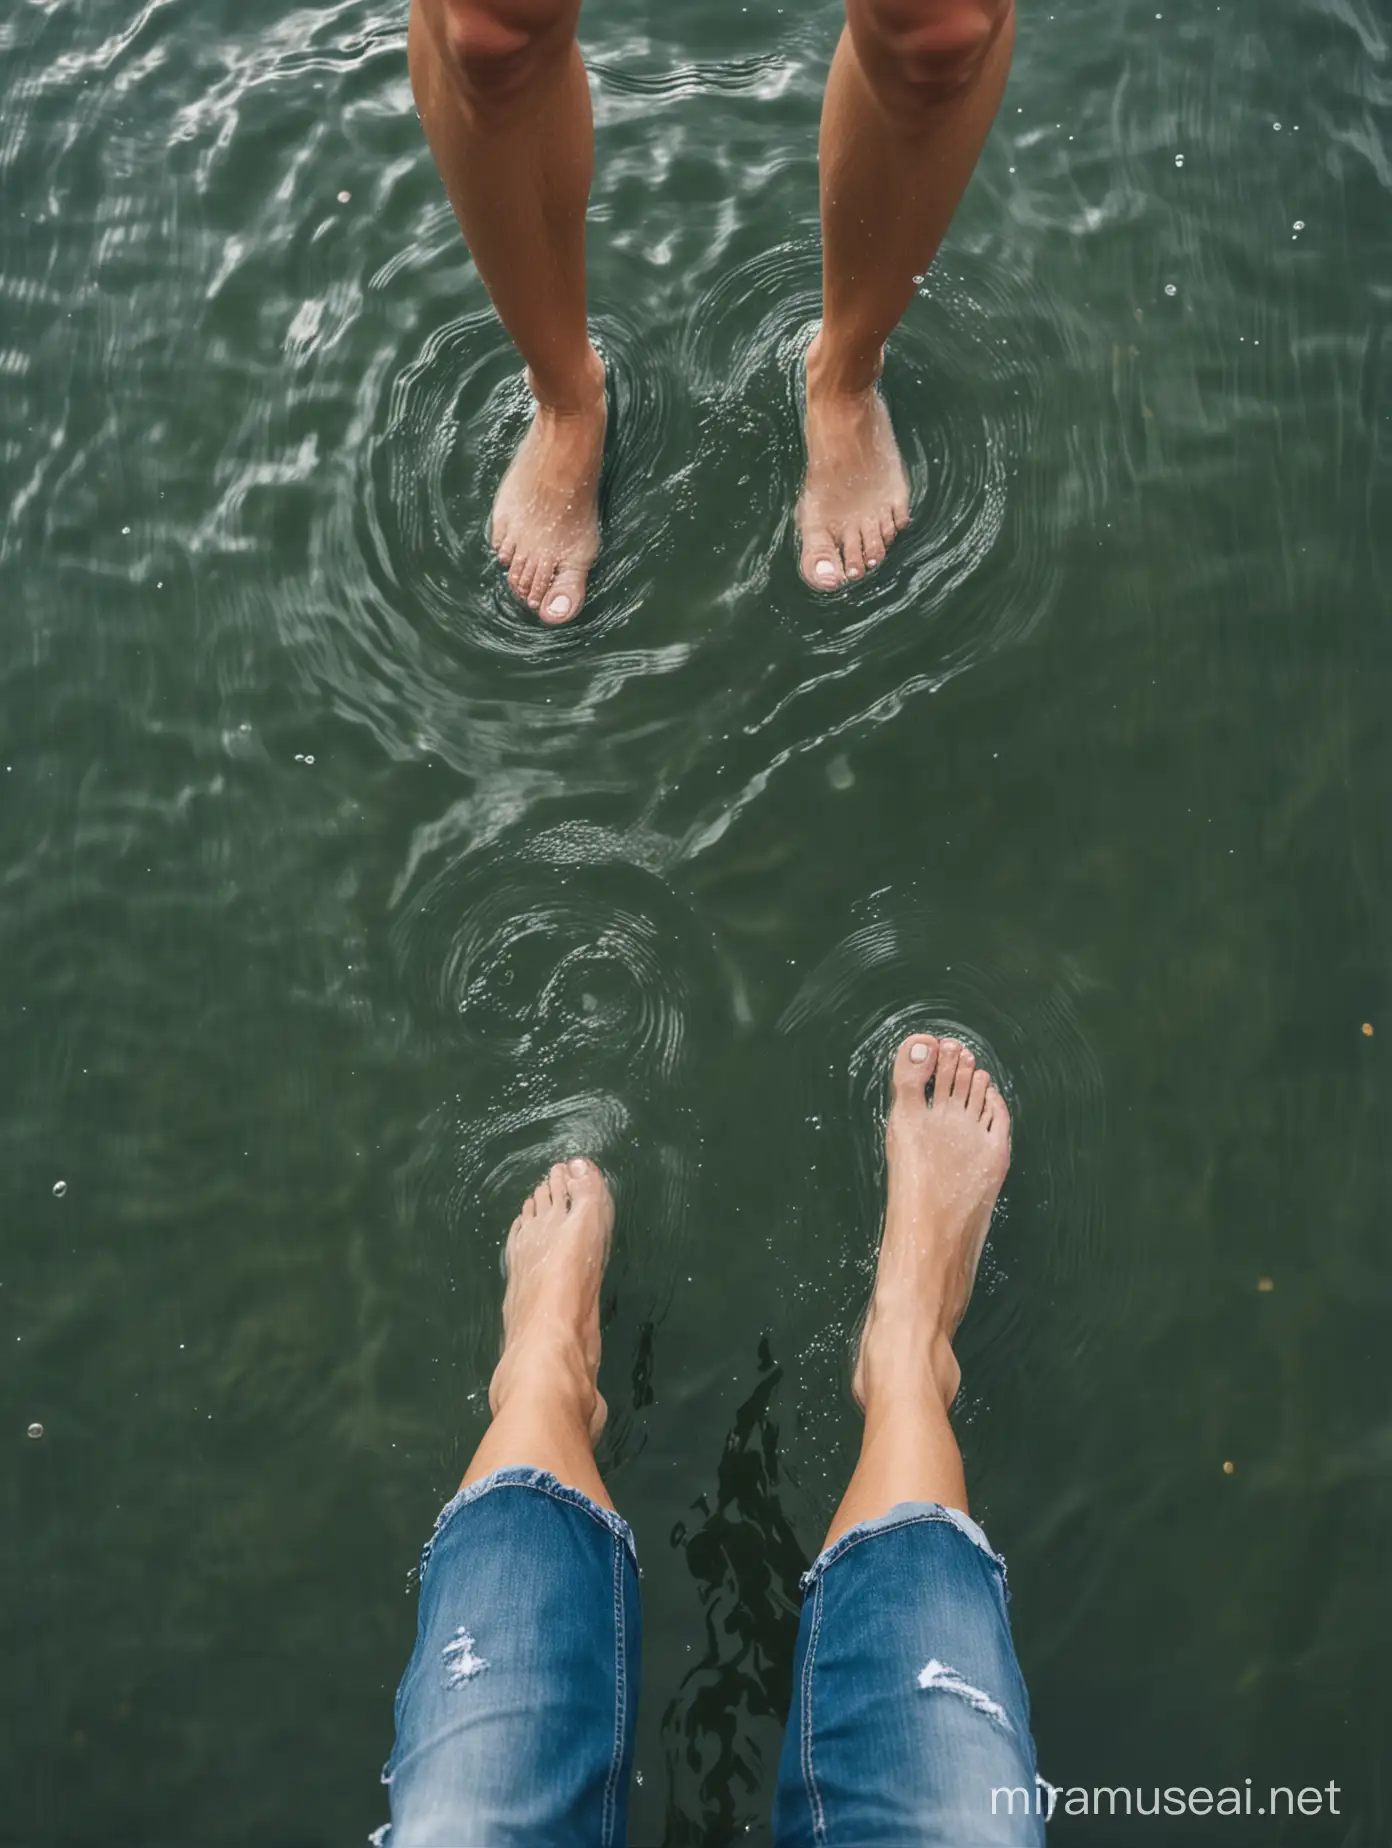 Two People Walking on Water from Overhead View